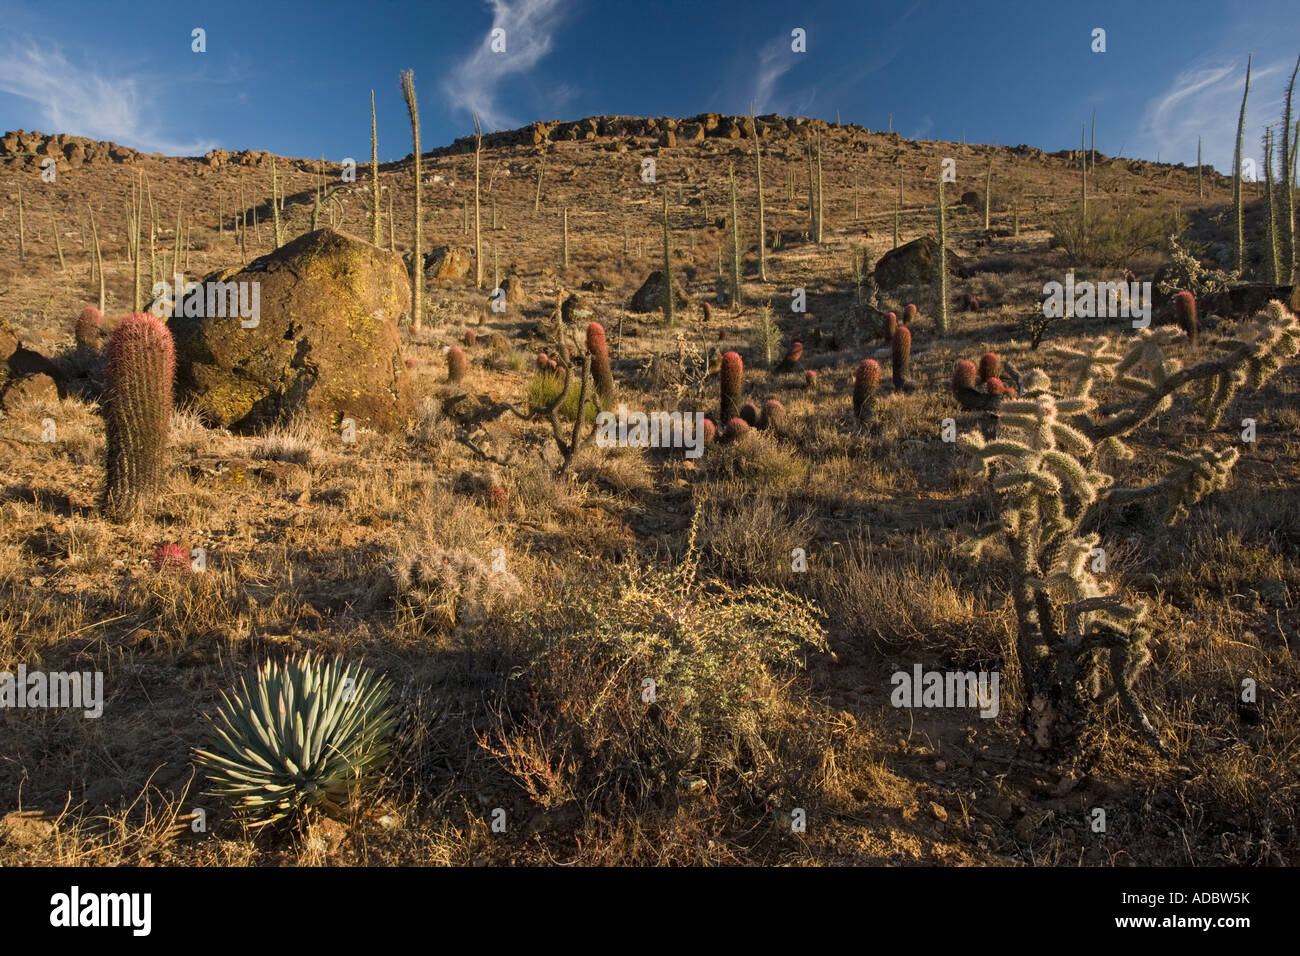 The cactus rich part of the Sonoran desert on the west side of Baja California including red barrel cactus and chollas, Mexico Stock Photo